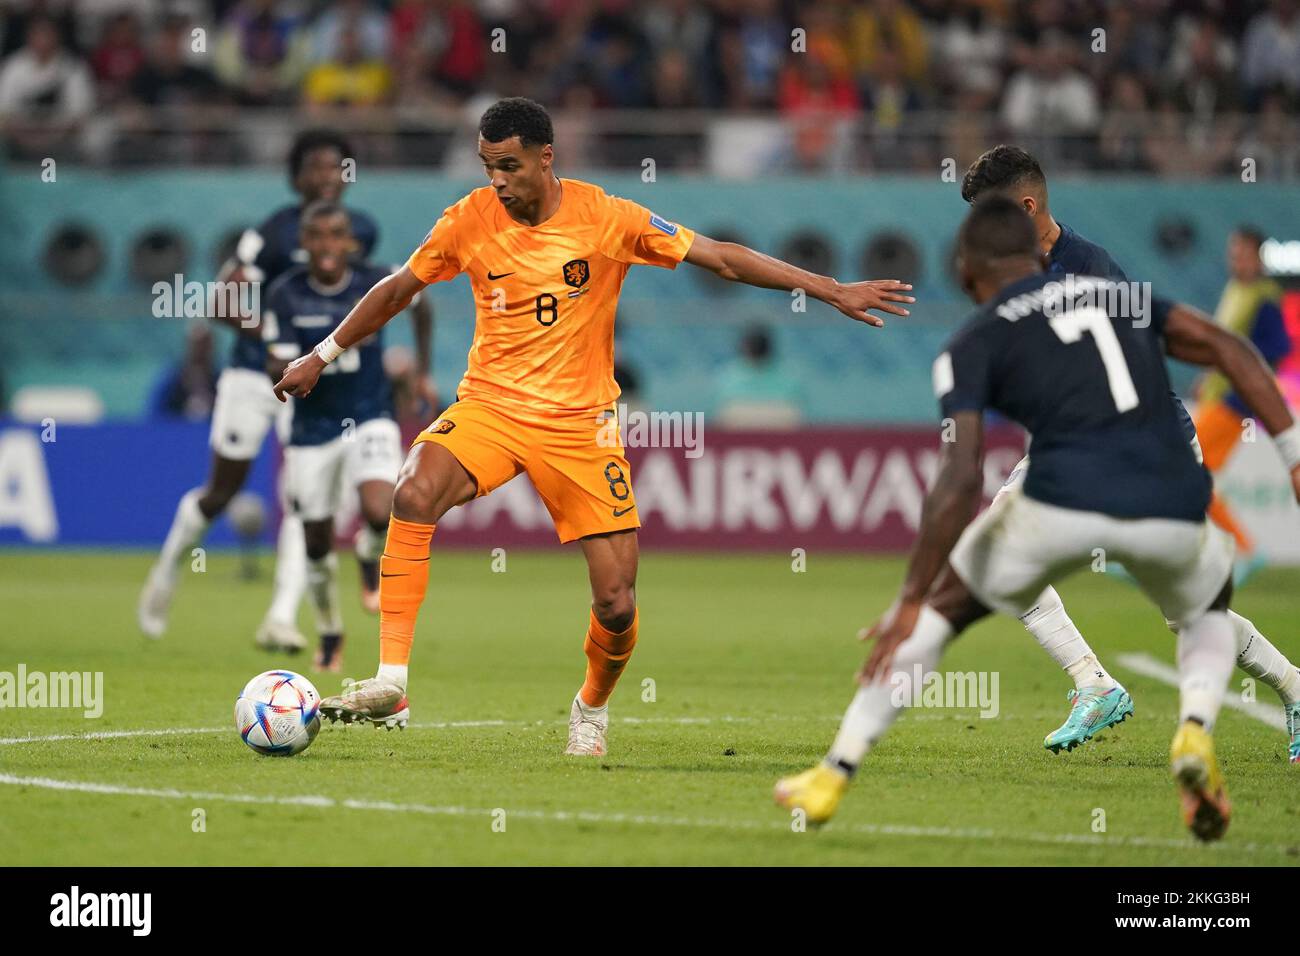 Doha, Qatar. 25th Nov, 2022. DOHA, QATAR - NOVEMBER 25: Player of Netherlands C. Gakpo controls the ball during the FIFA World Cup Qatar 2022 group A match between Netherlands and Ecuador at Khalifa International Stadium on November 25, 2022 in Doha, Qatar. (Photo by Florencia Tan Jun/PxImages) Credit: Px Images/Alamy Live News Stock Photo